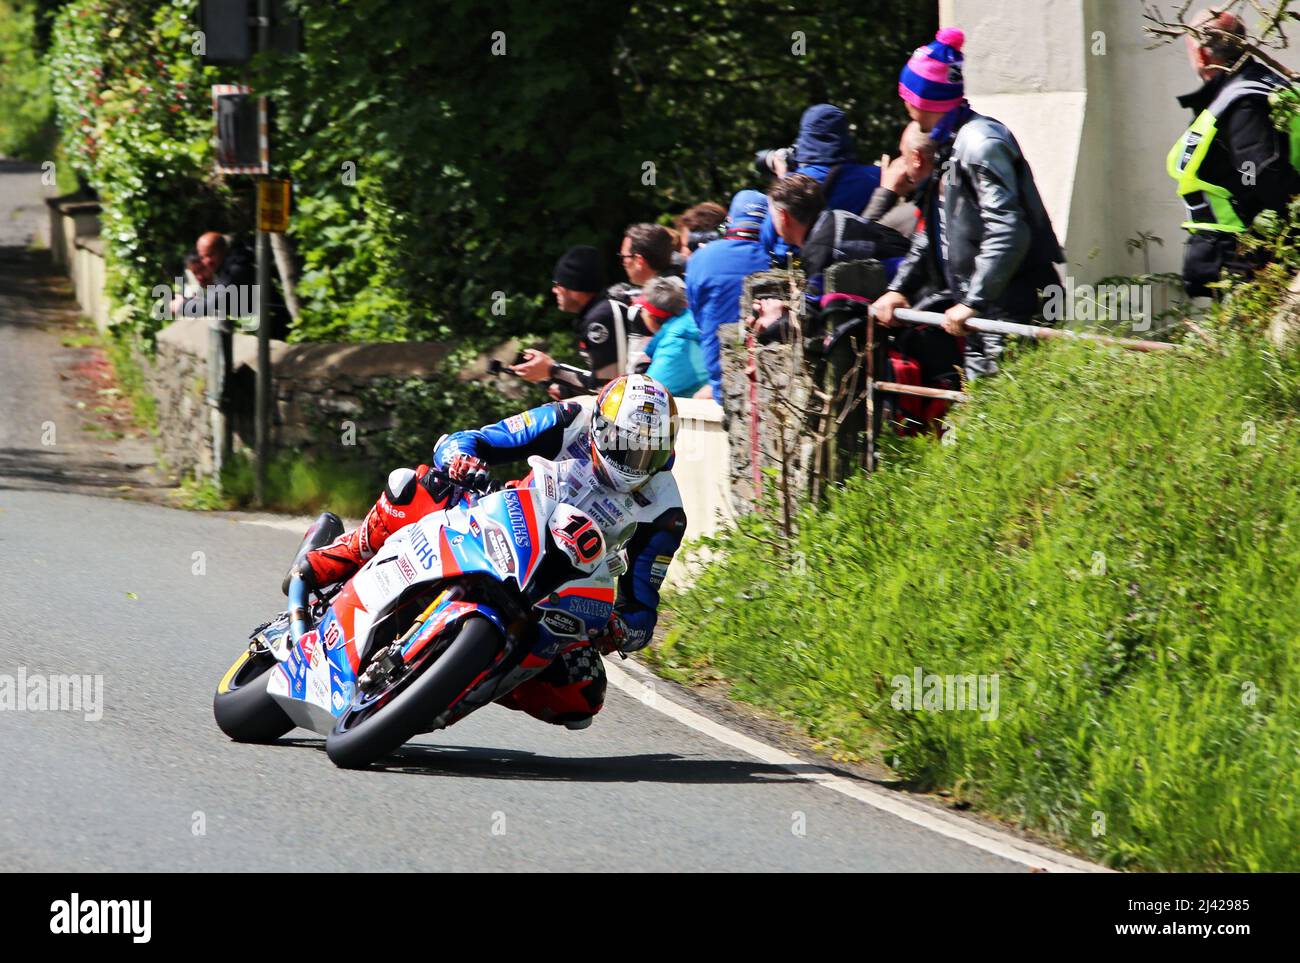 Peter Hickman, 'Hicky' at the 2019 Isle of Man TT motorcycle races riding the Smiths Racing BMW S1000RR superbike. Stock Photo